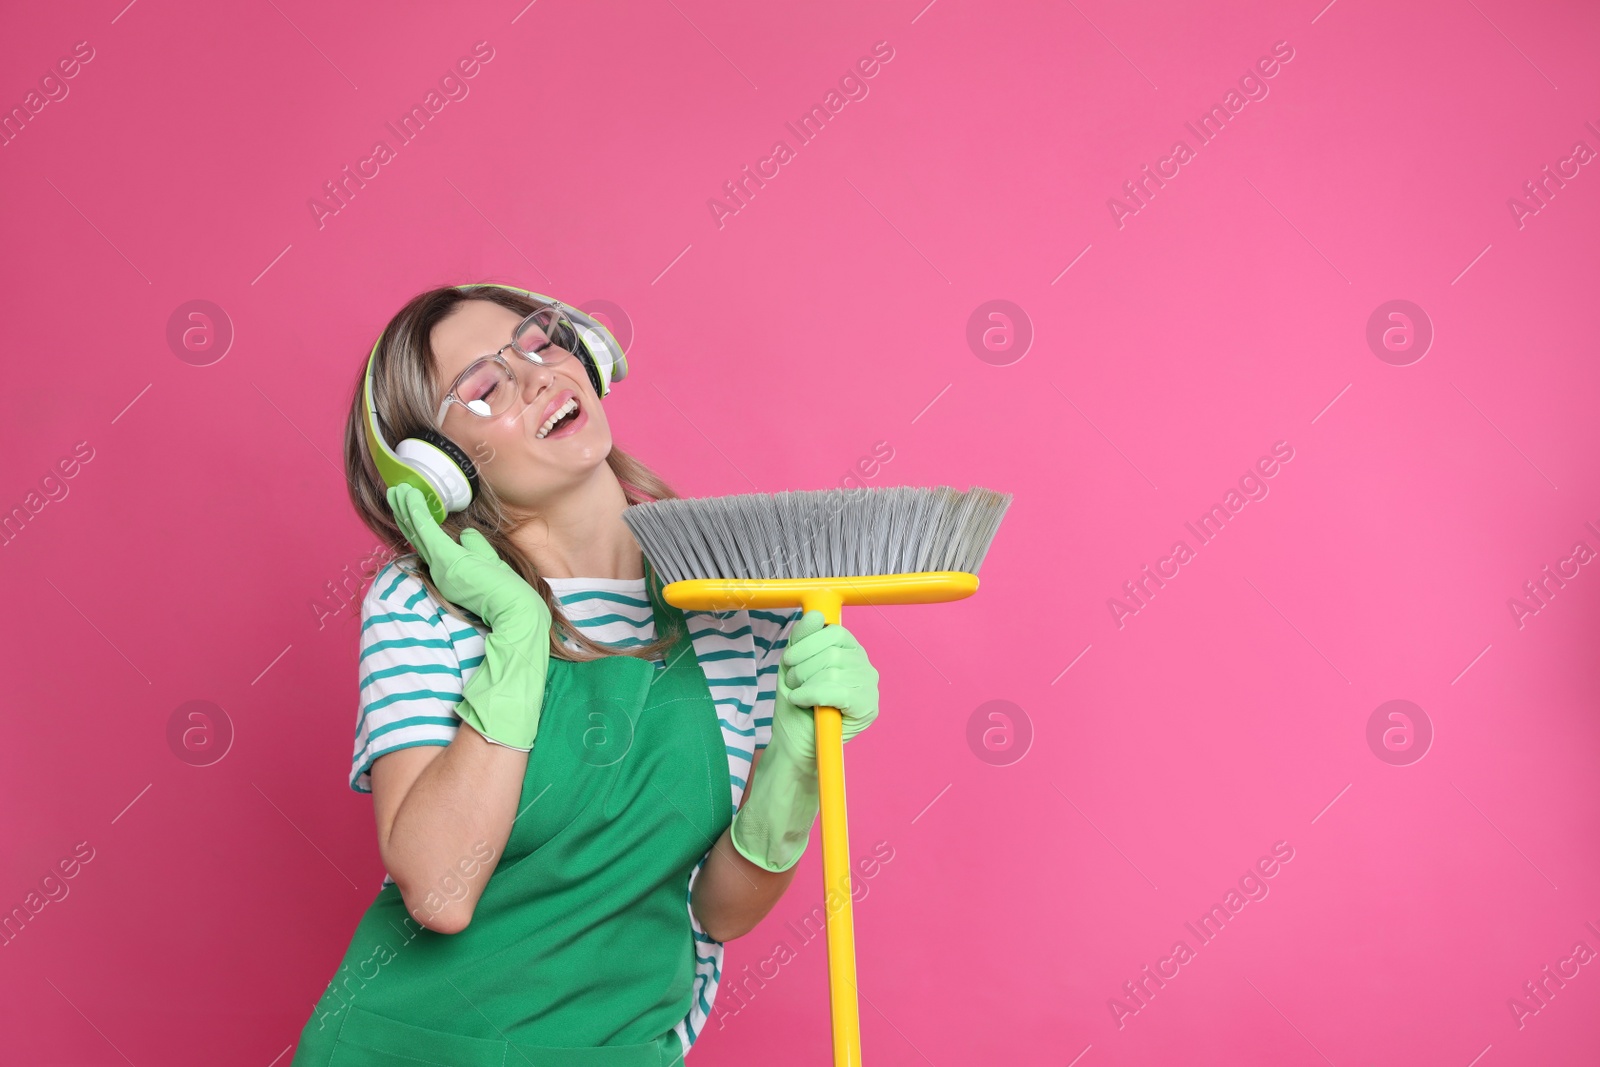 Photo of Beautiful young woman with headphones and floor brush singing on pink background. Space for text